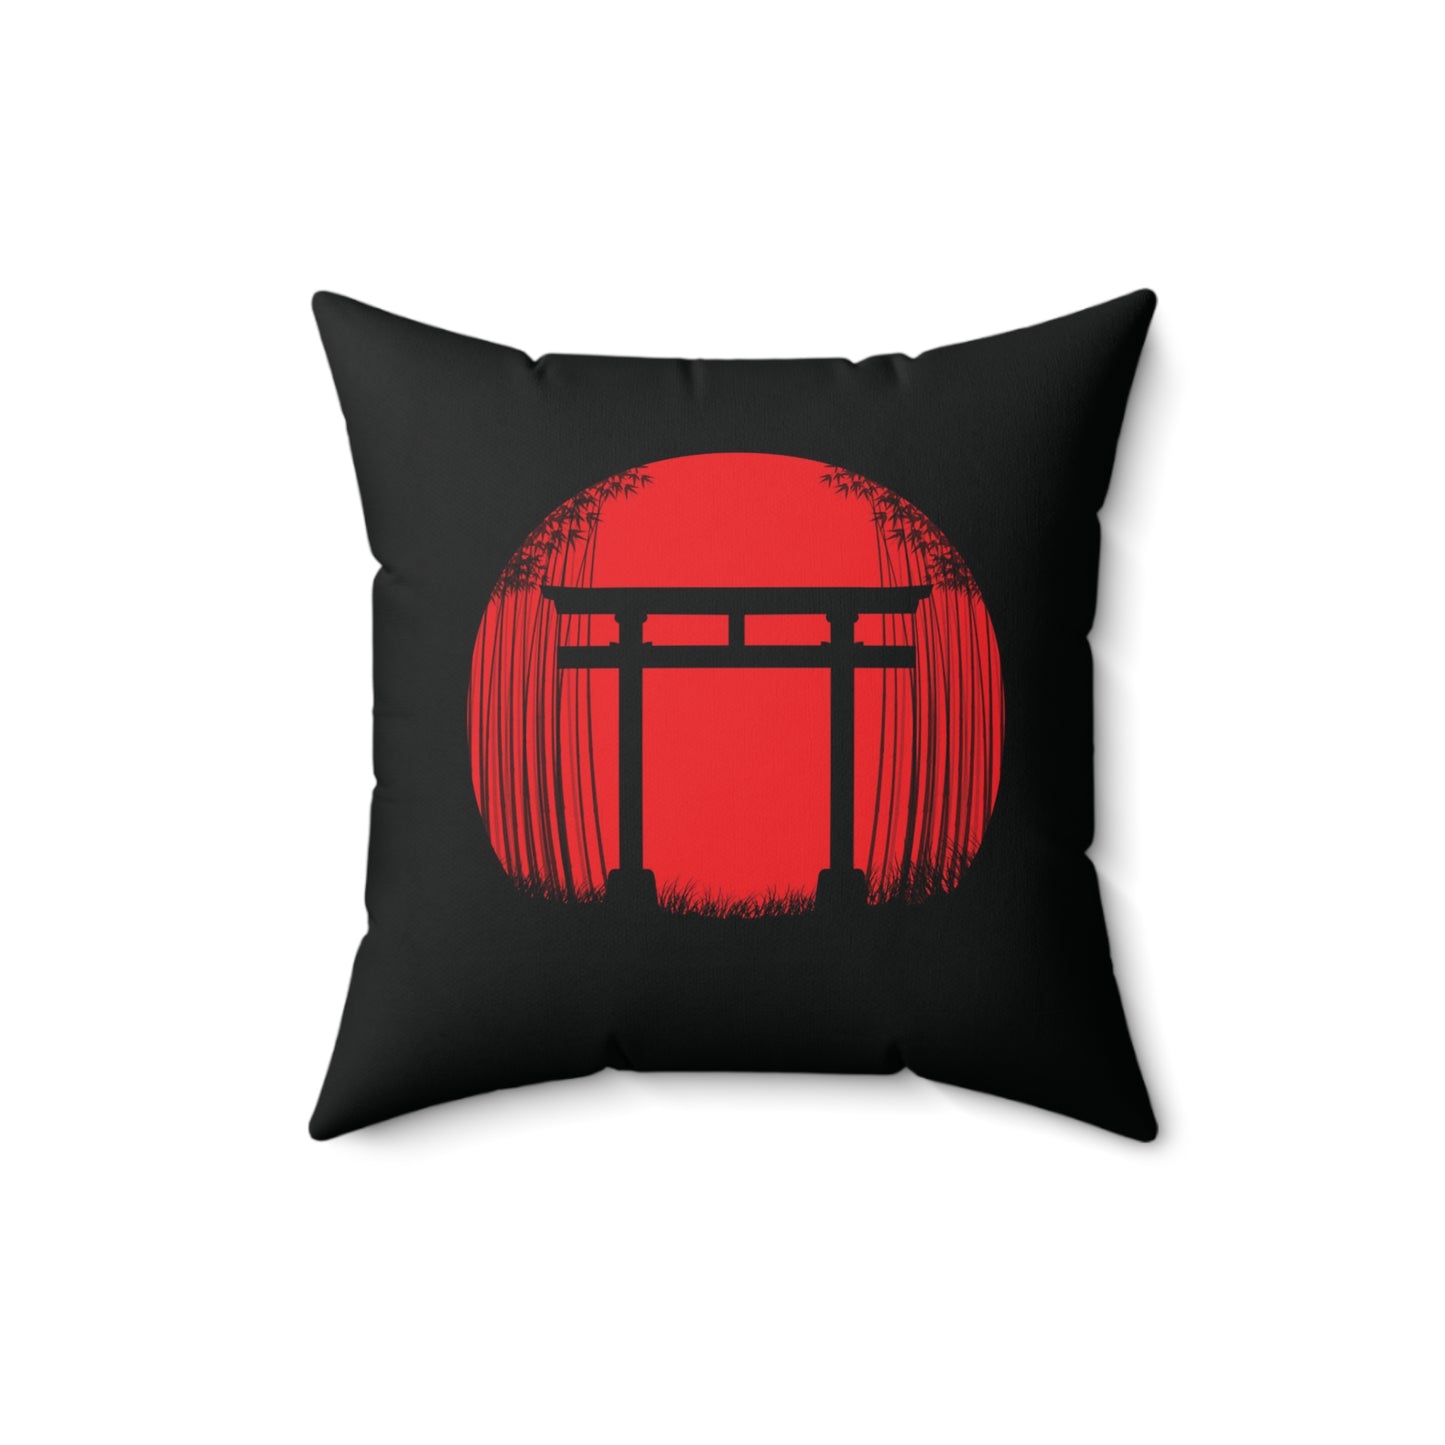 Bamboo Forest Japanese Sunrise Square Pillow